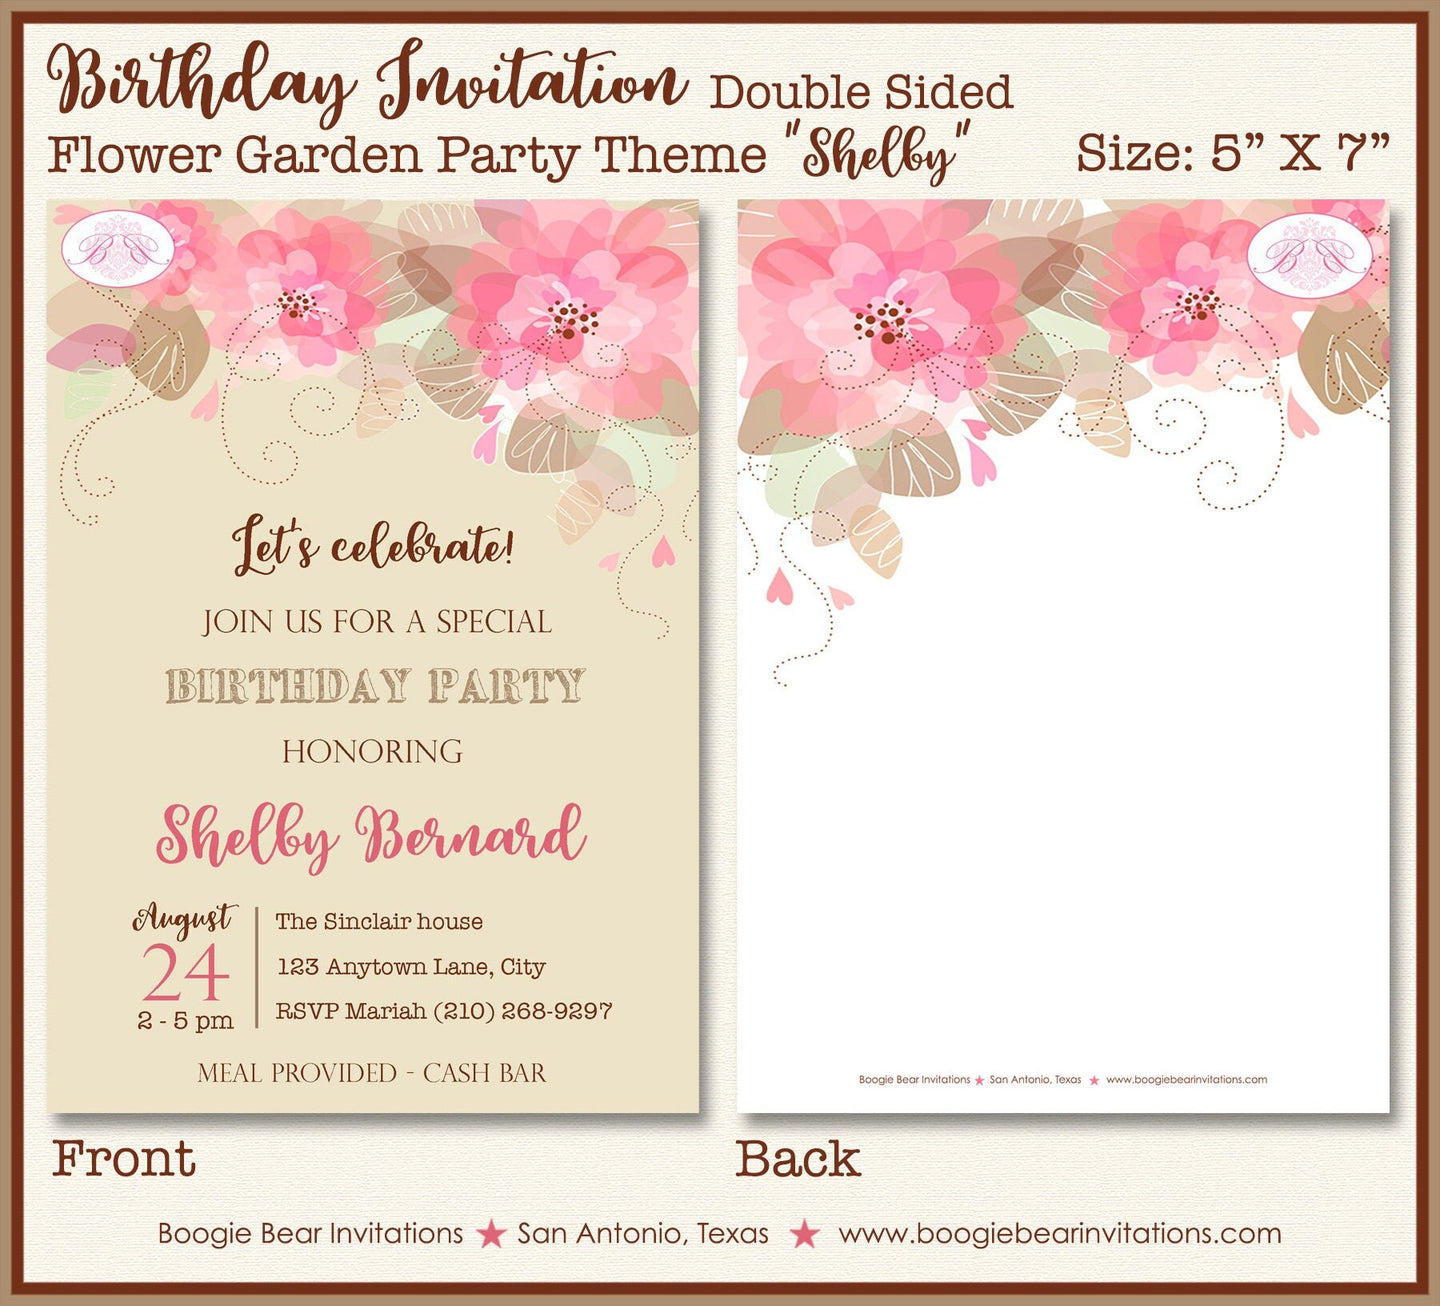 Elegant Flowers Birthday Party Invitation Ladies Garden Pink Rustic Picnic Boogie Bear Invitations Shelby Theme Paperless Printable Printed